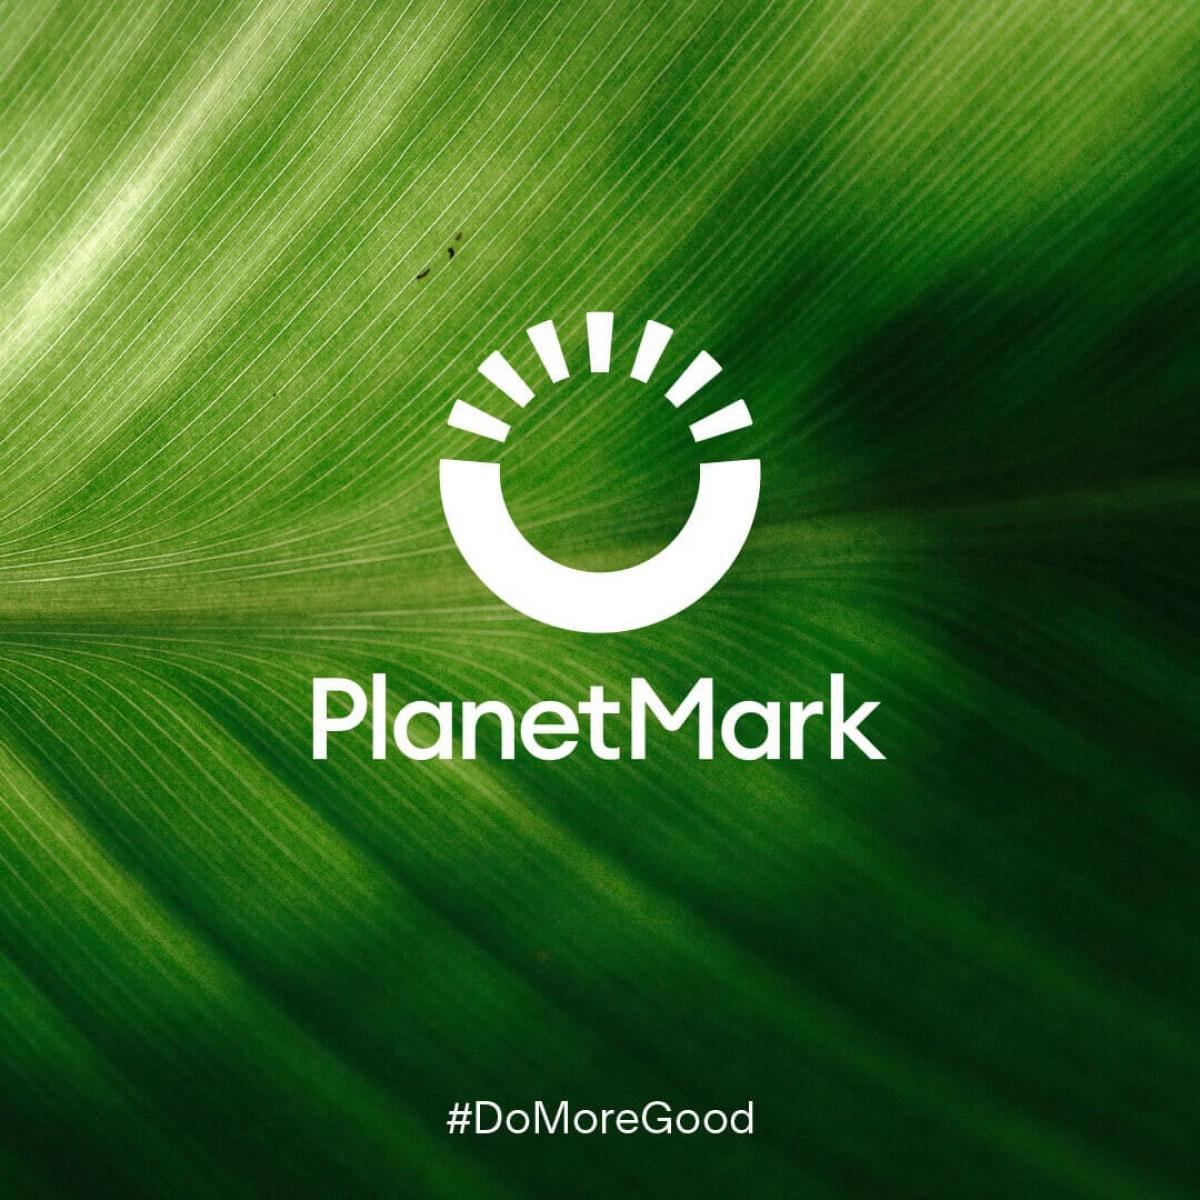 planet mark logo depicting circle with half portrayed as rays on green leaf background